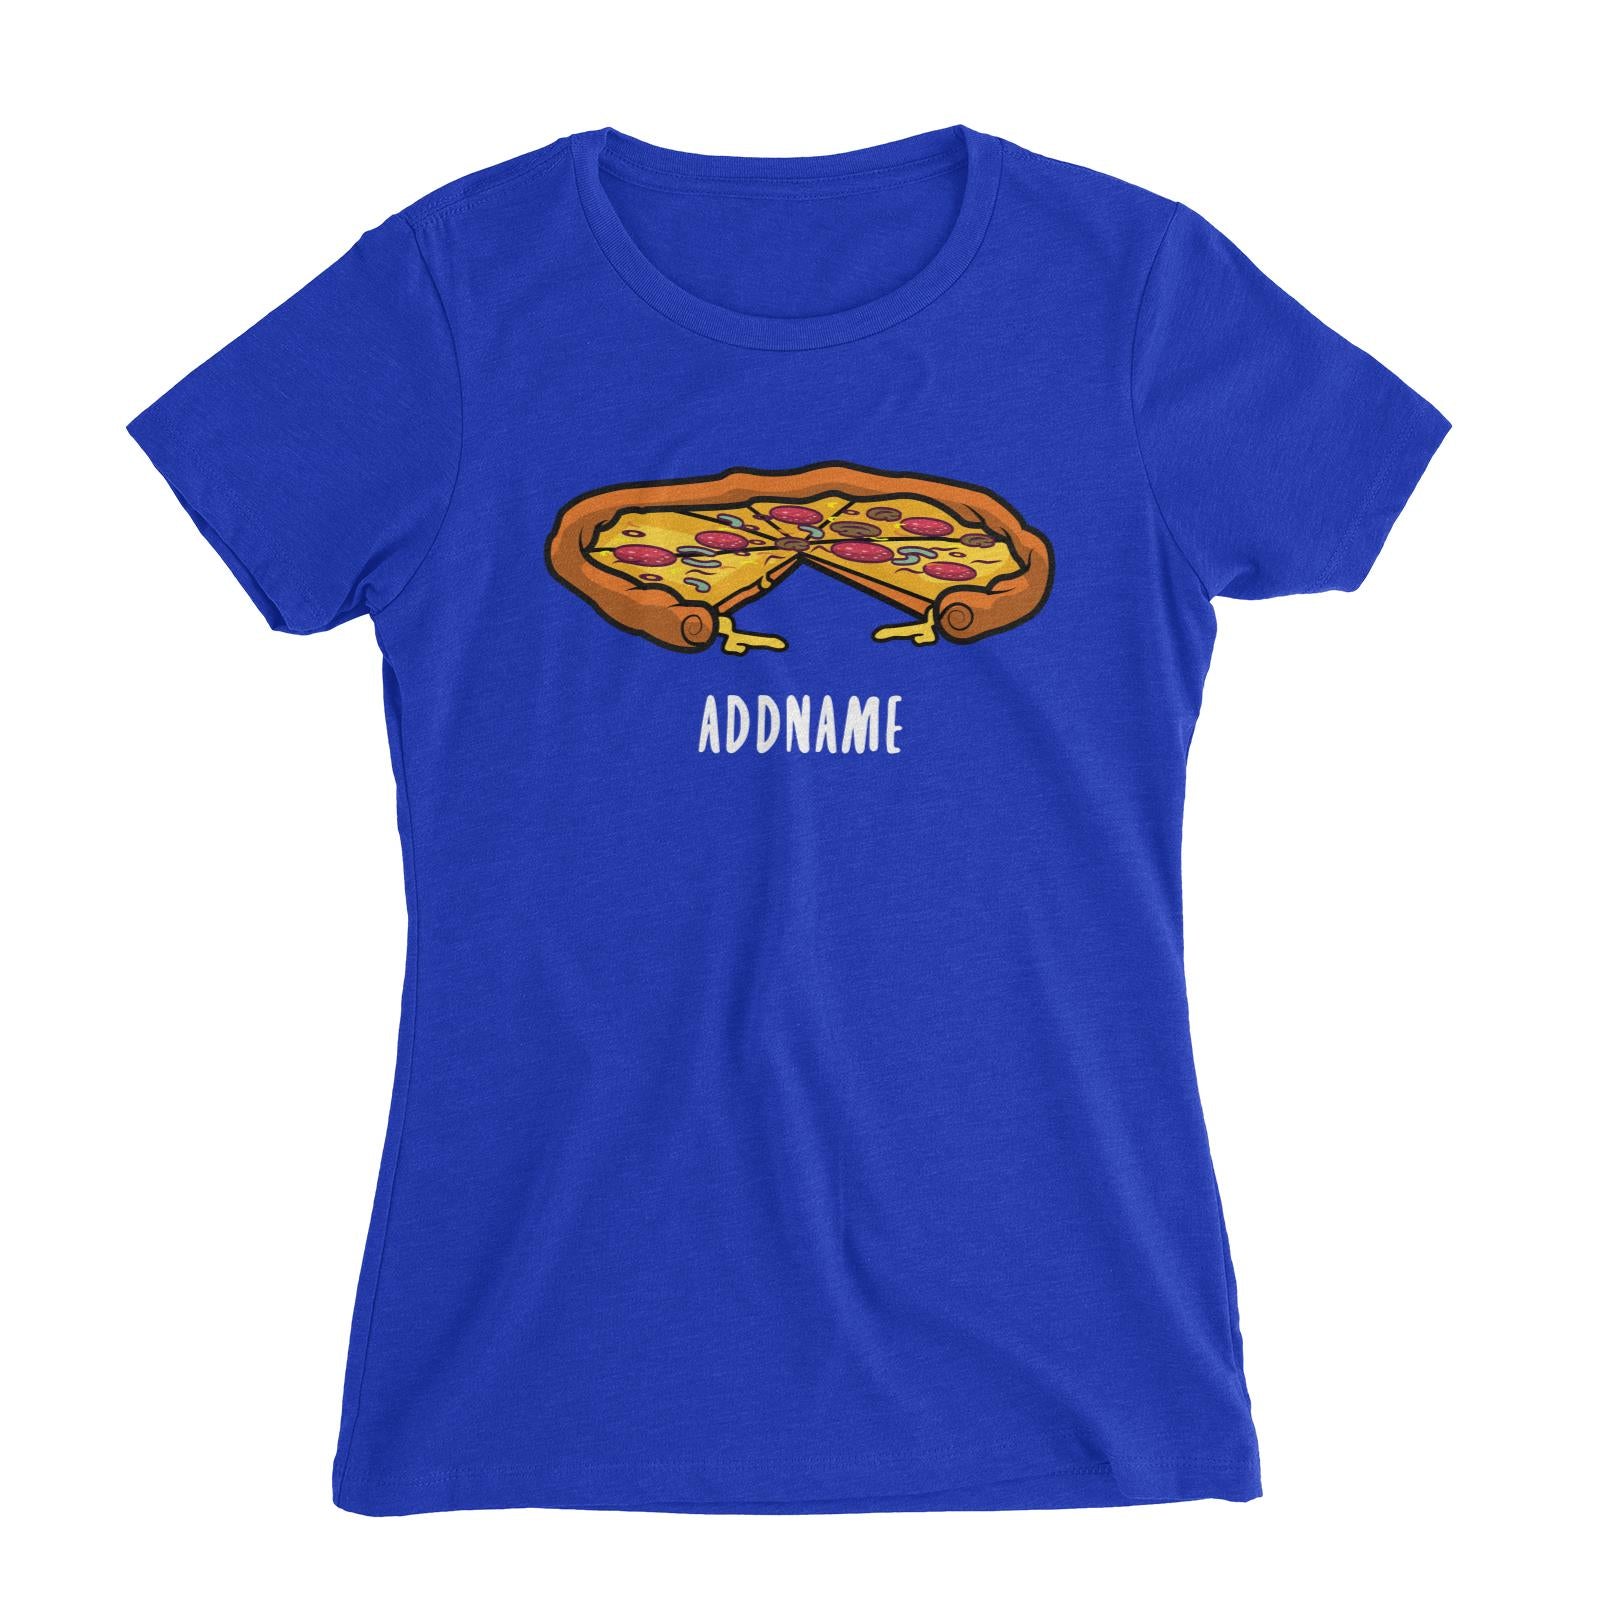 Fast Food Whole Pizza with A Slice Taken Out Addname Women's Slim Fit T-Shirt  Matching Family Comic Cartoon Personalizable Designs